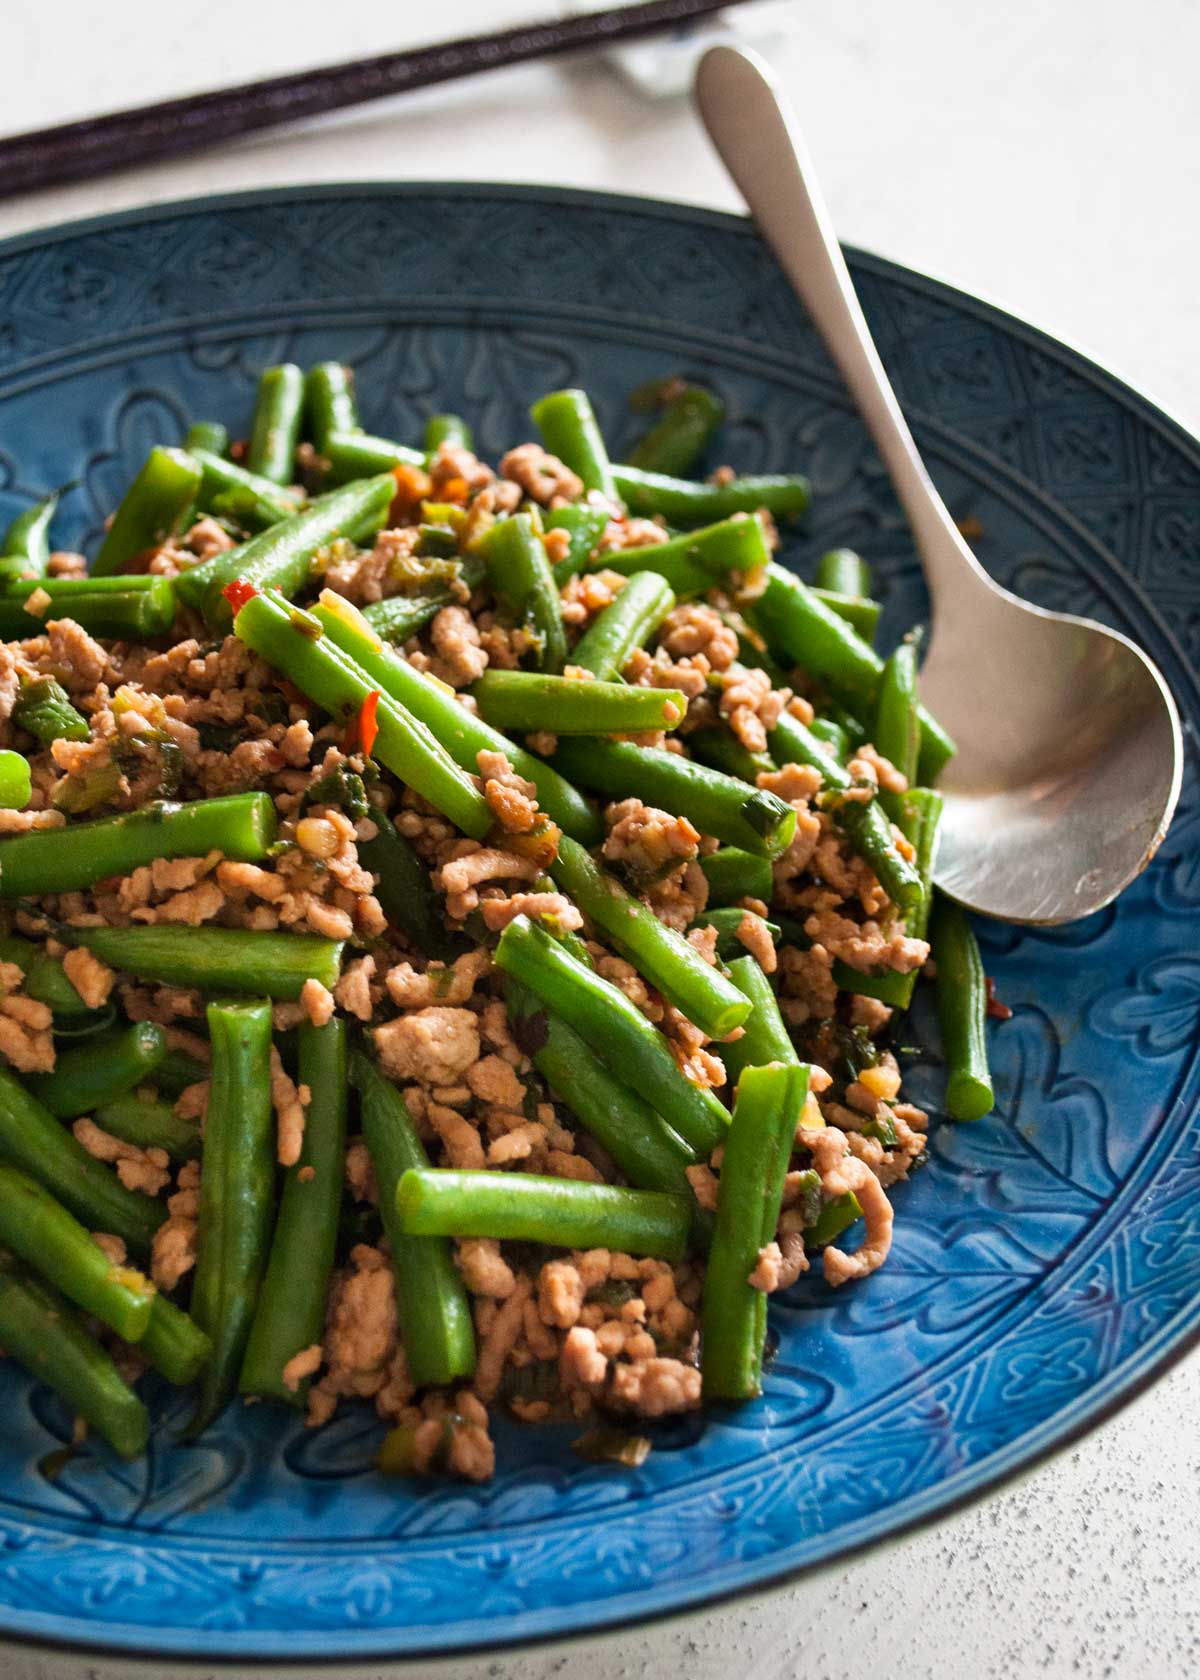 Beans and pork mince stir fry is the Japanese version of Chinese style dish which goes so well with rice. It's not as oily as Chinese style with milder spices.